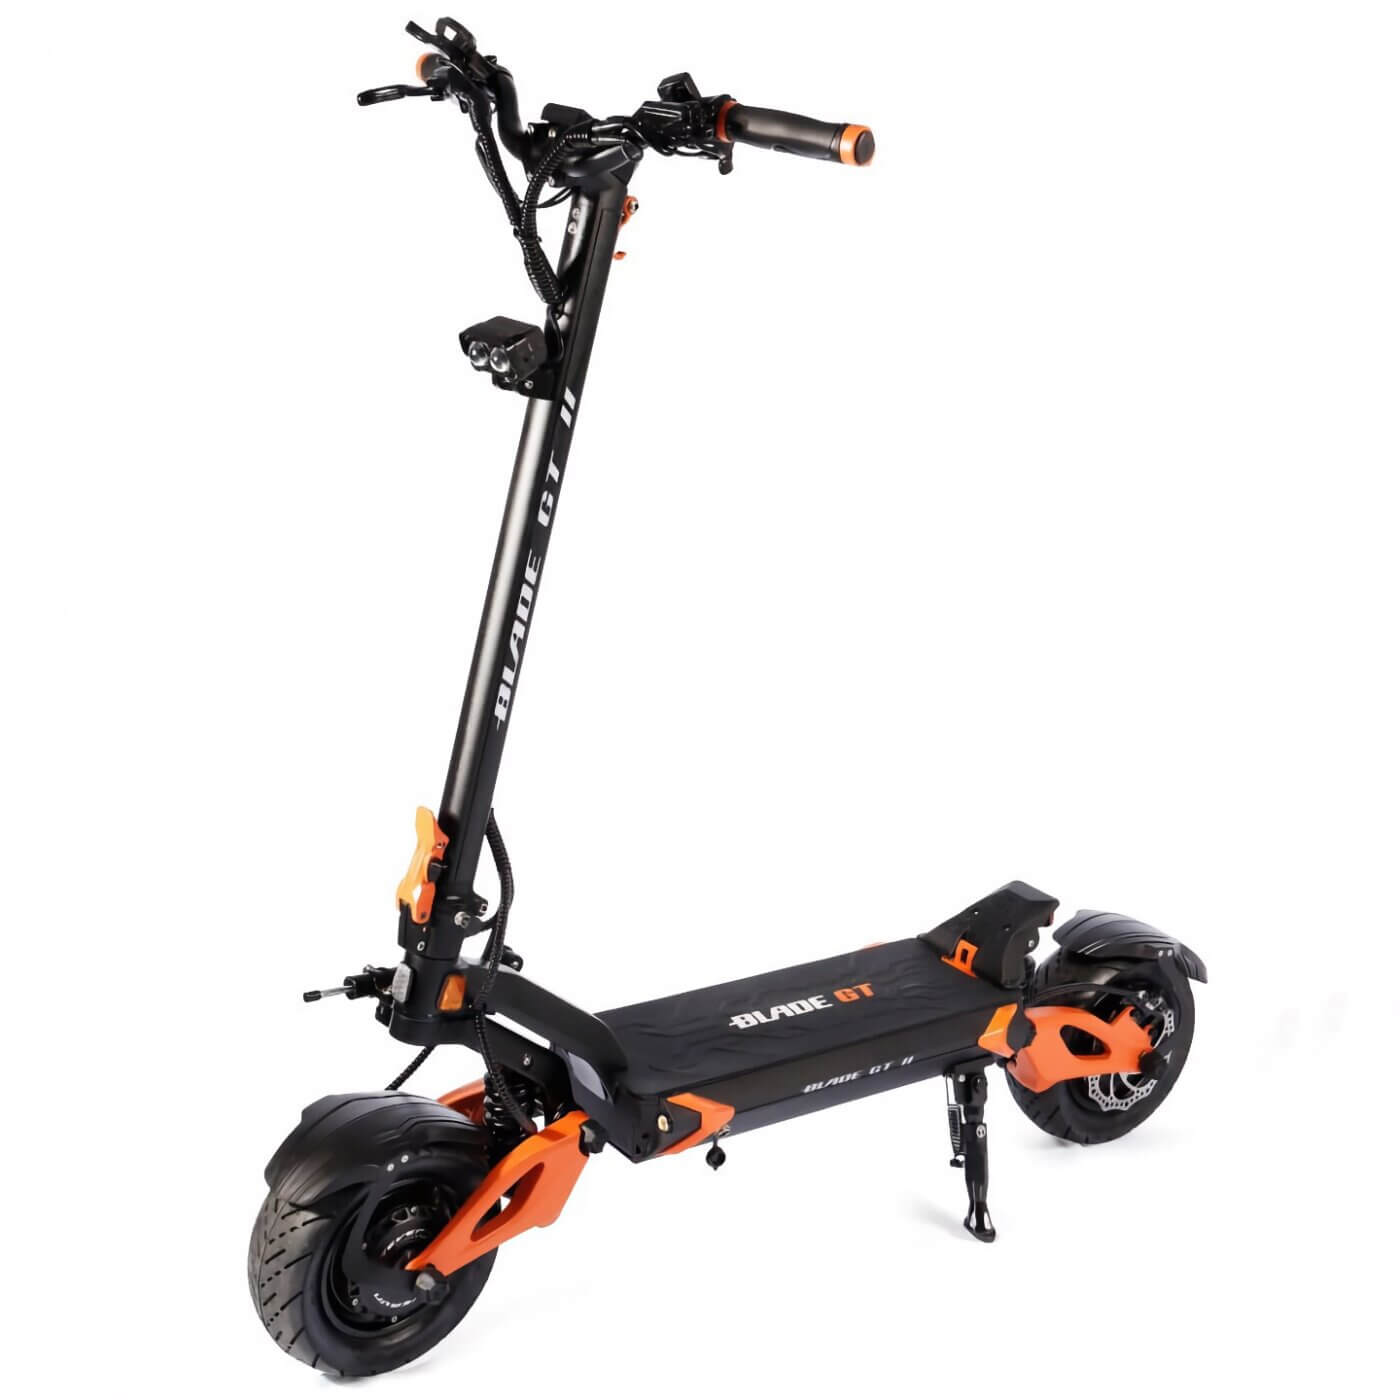 An electric scooter on a white background named Blade GT II.